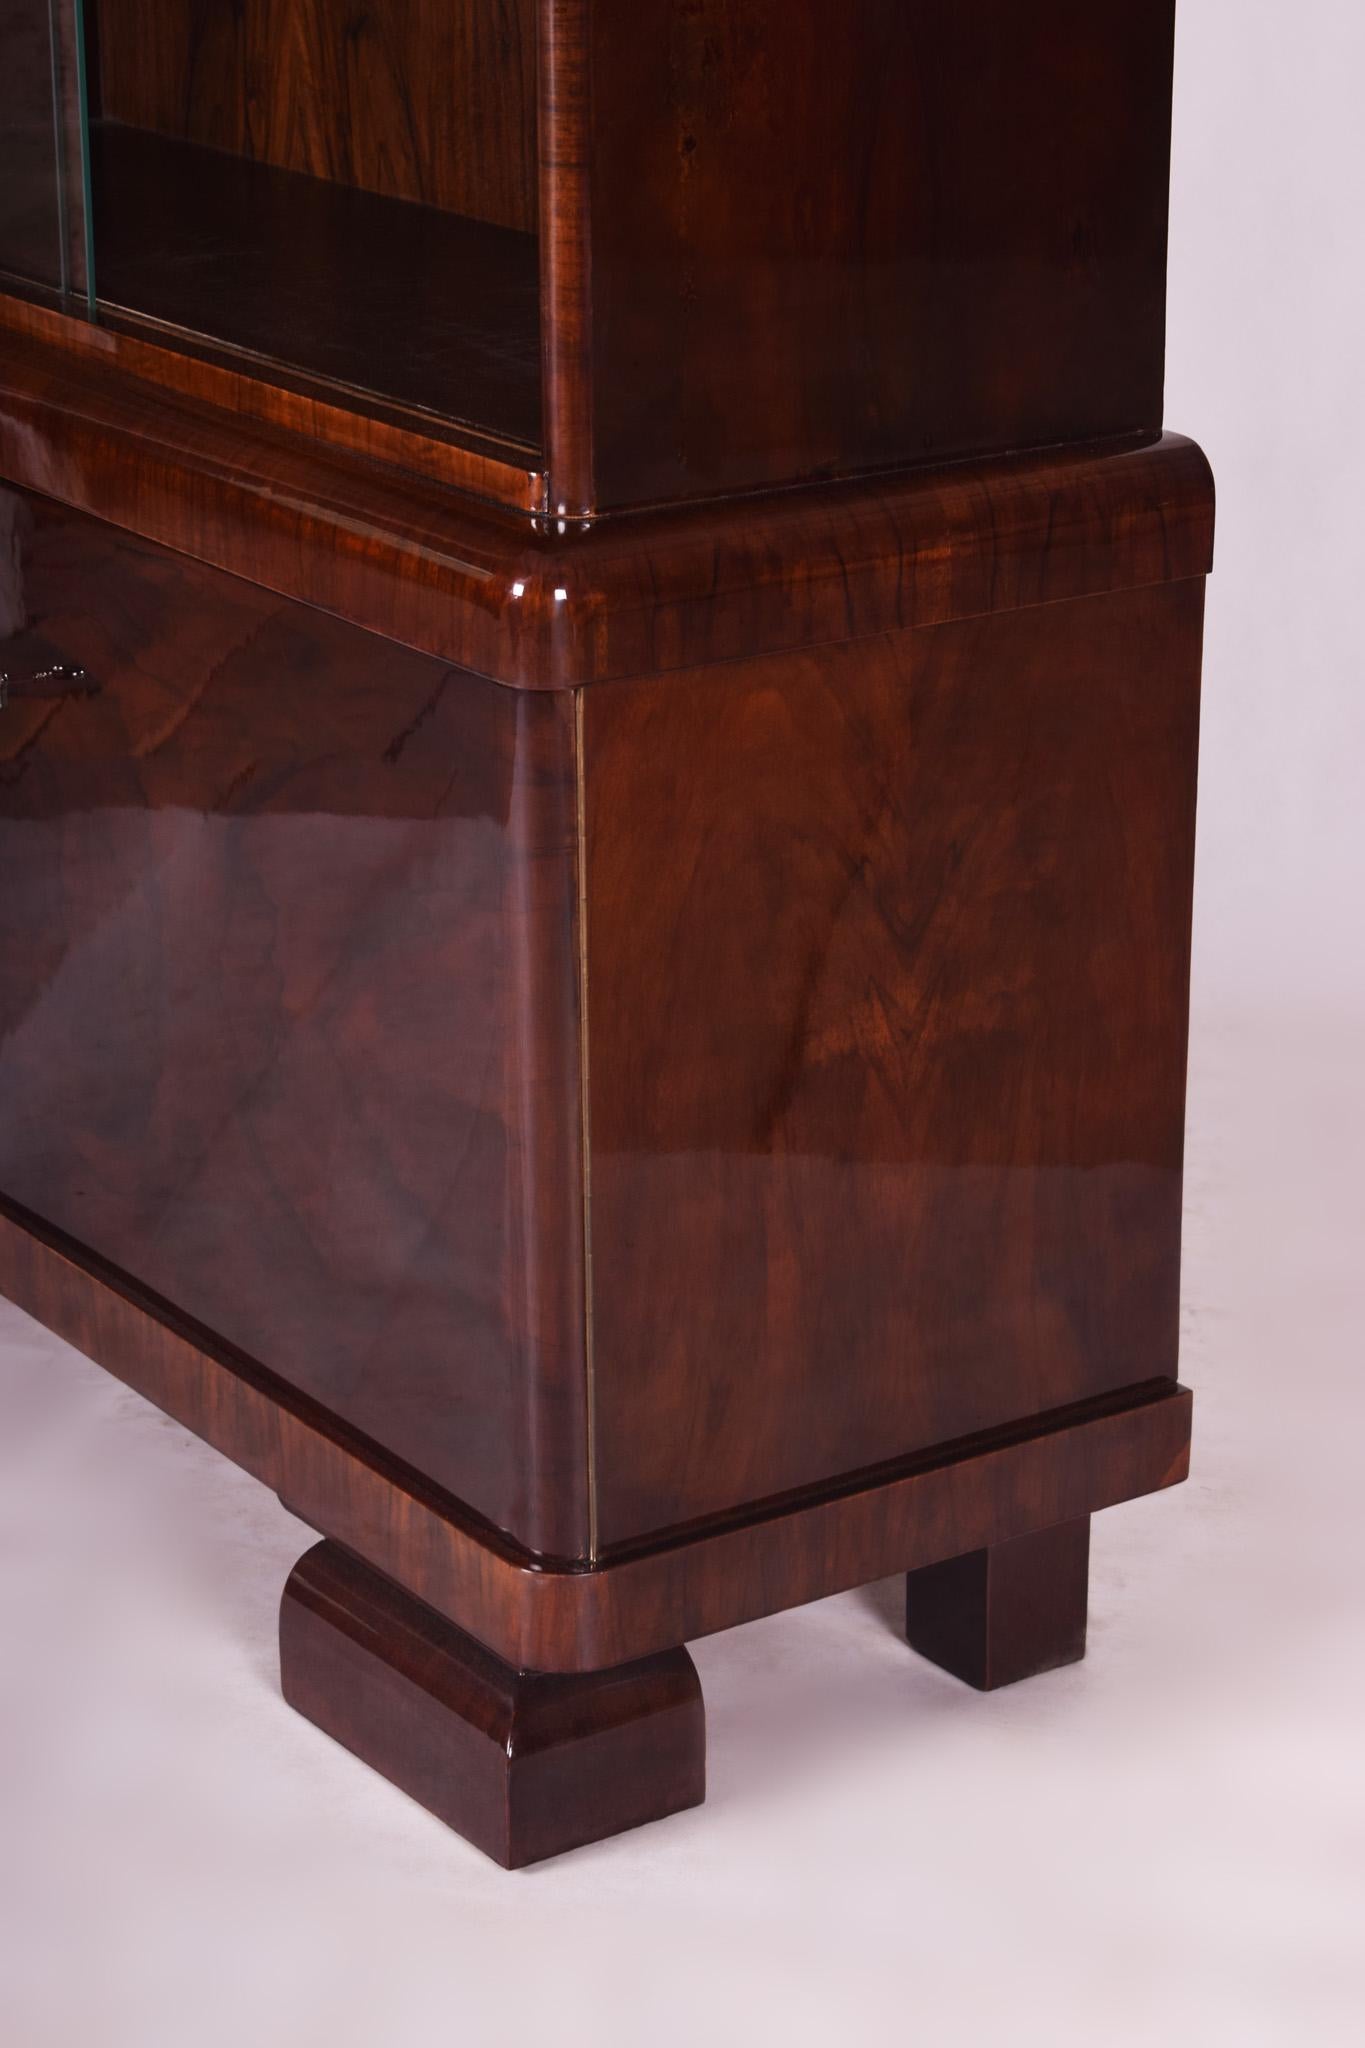 Completely Restored Walnut Art Deco Showcase from Czechia, 1930s For Sale 9